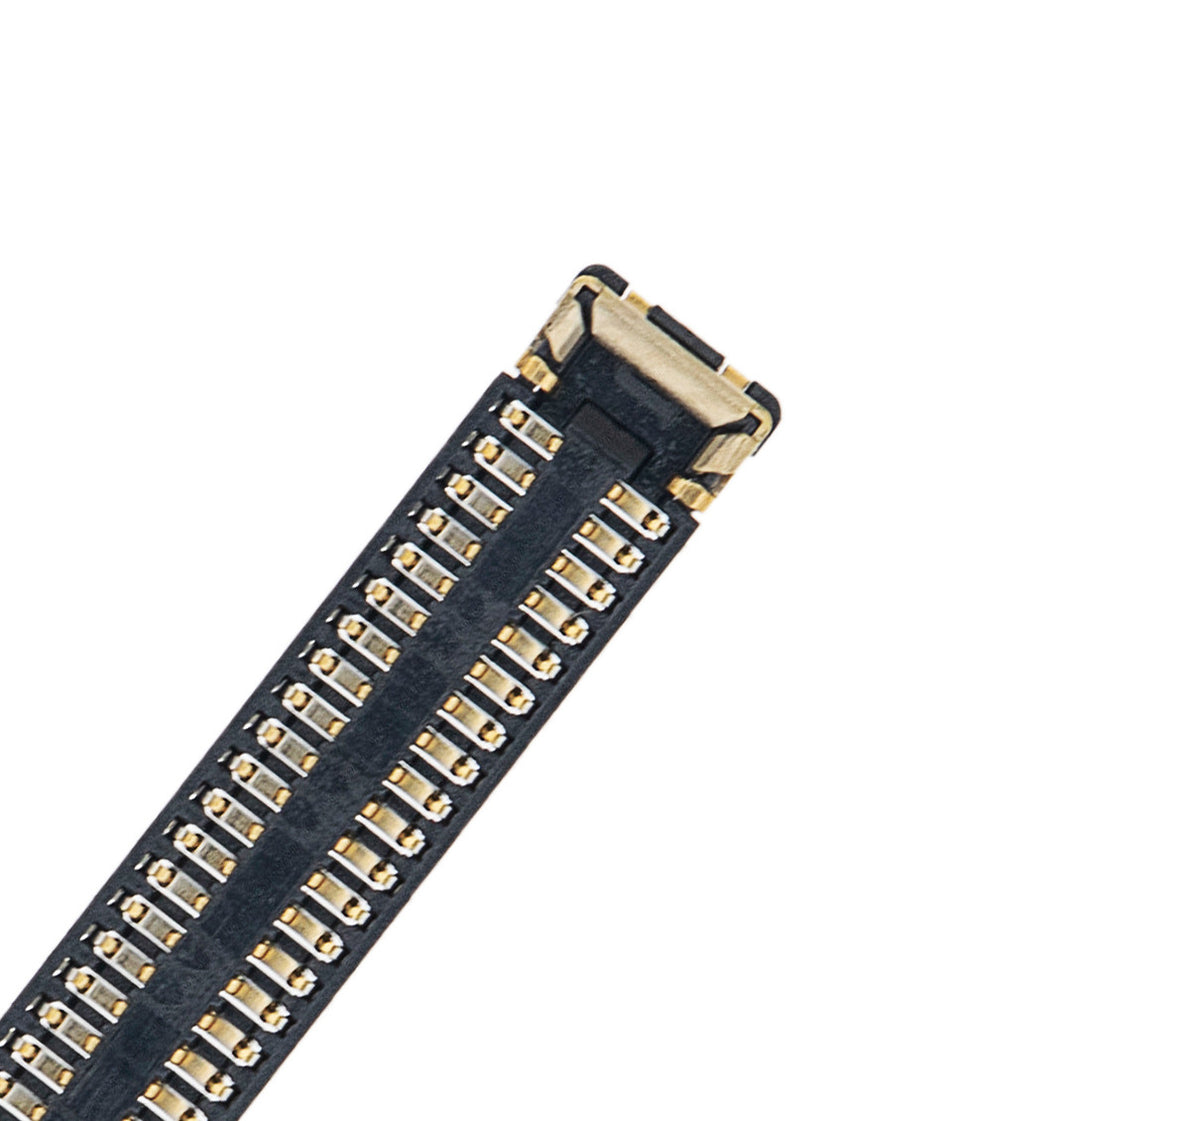 DIGITIZER (ON THE MOTHERBOARD) FPC CONNECTOR (50 PIN) FOR IPAD 6